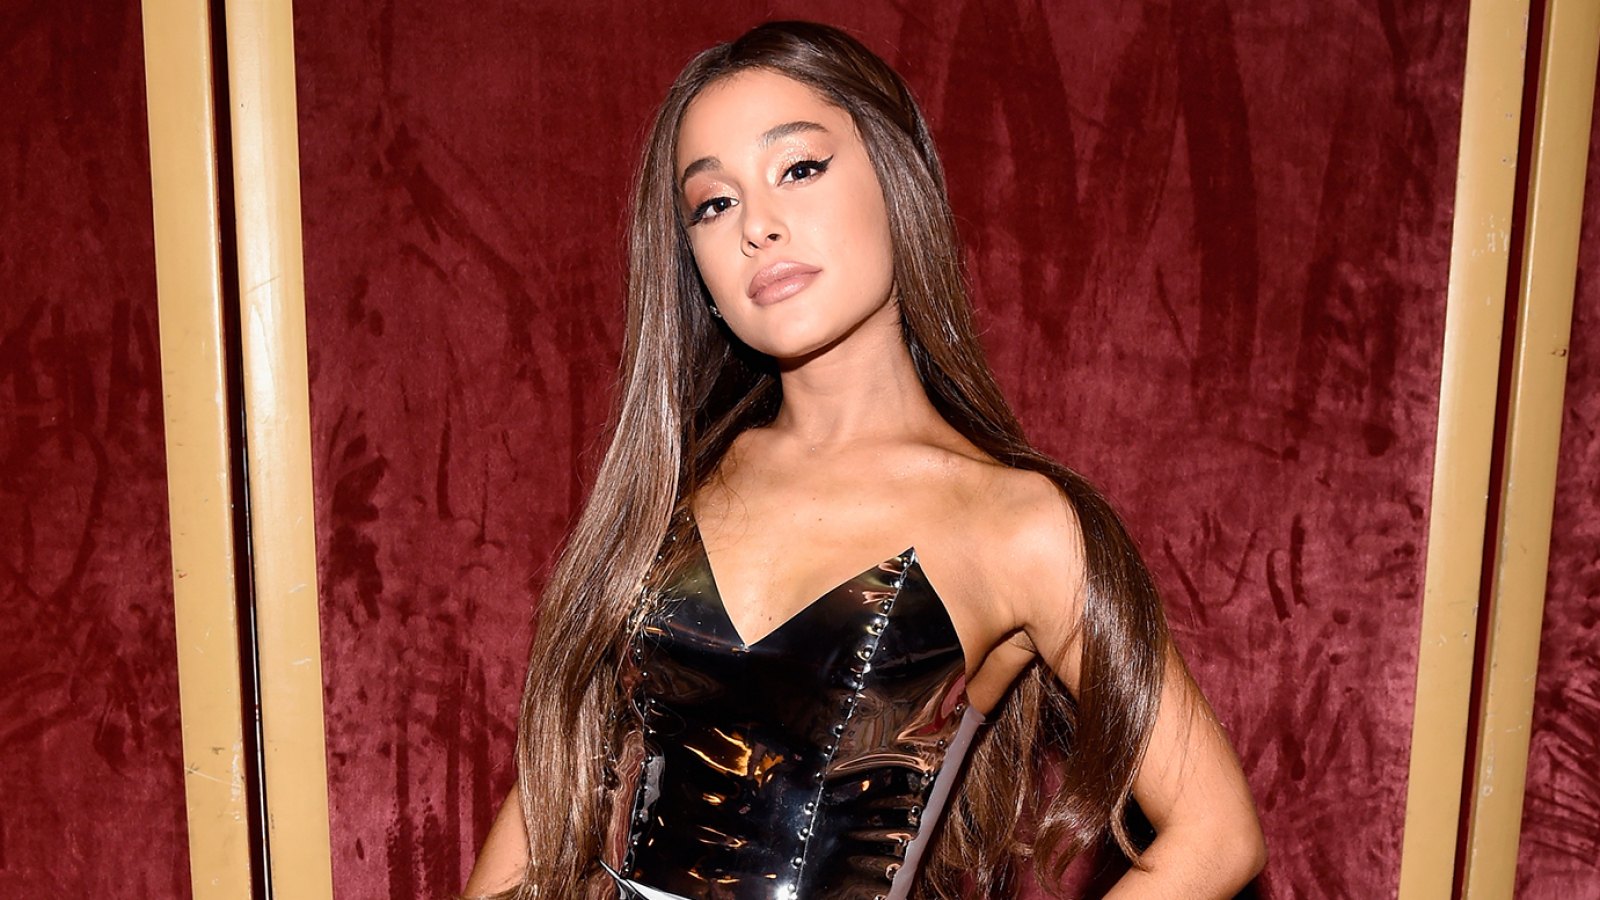 Ariana Grande Seduces ‘Riverdale’ Star In ‘Break Up with Your Girlfriend, I'm Bored’ Video